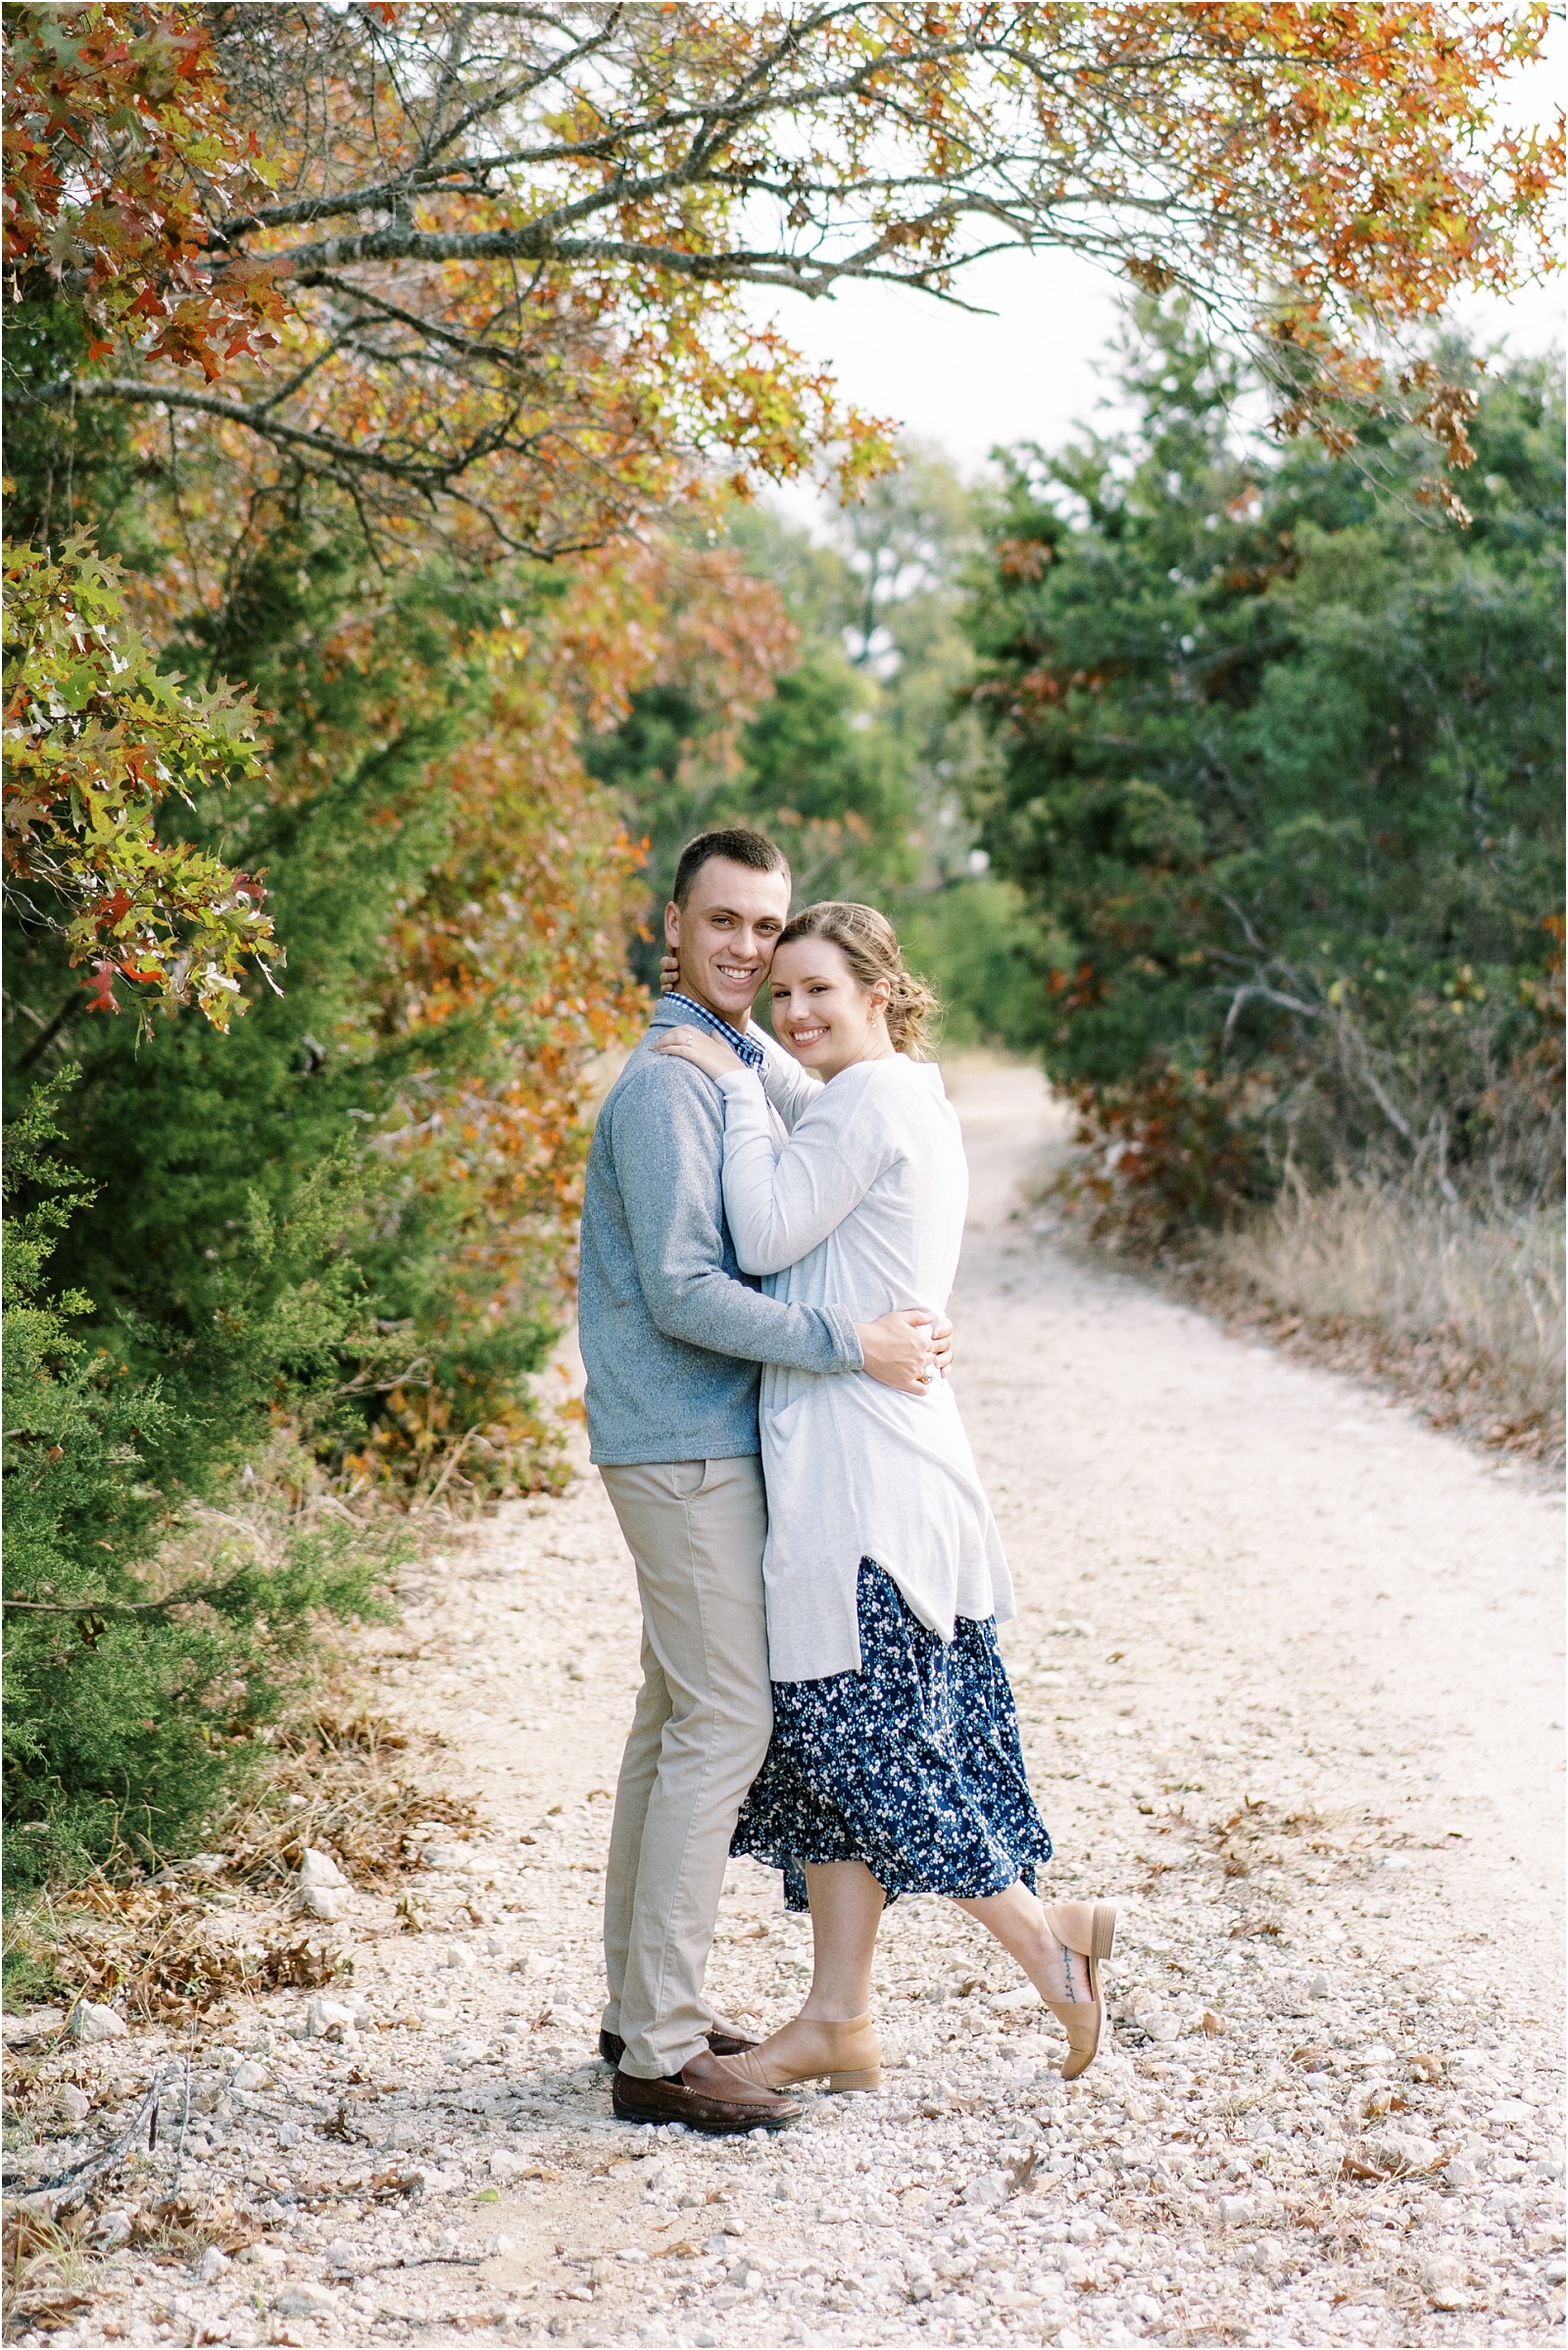 Cozy fall engagement session